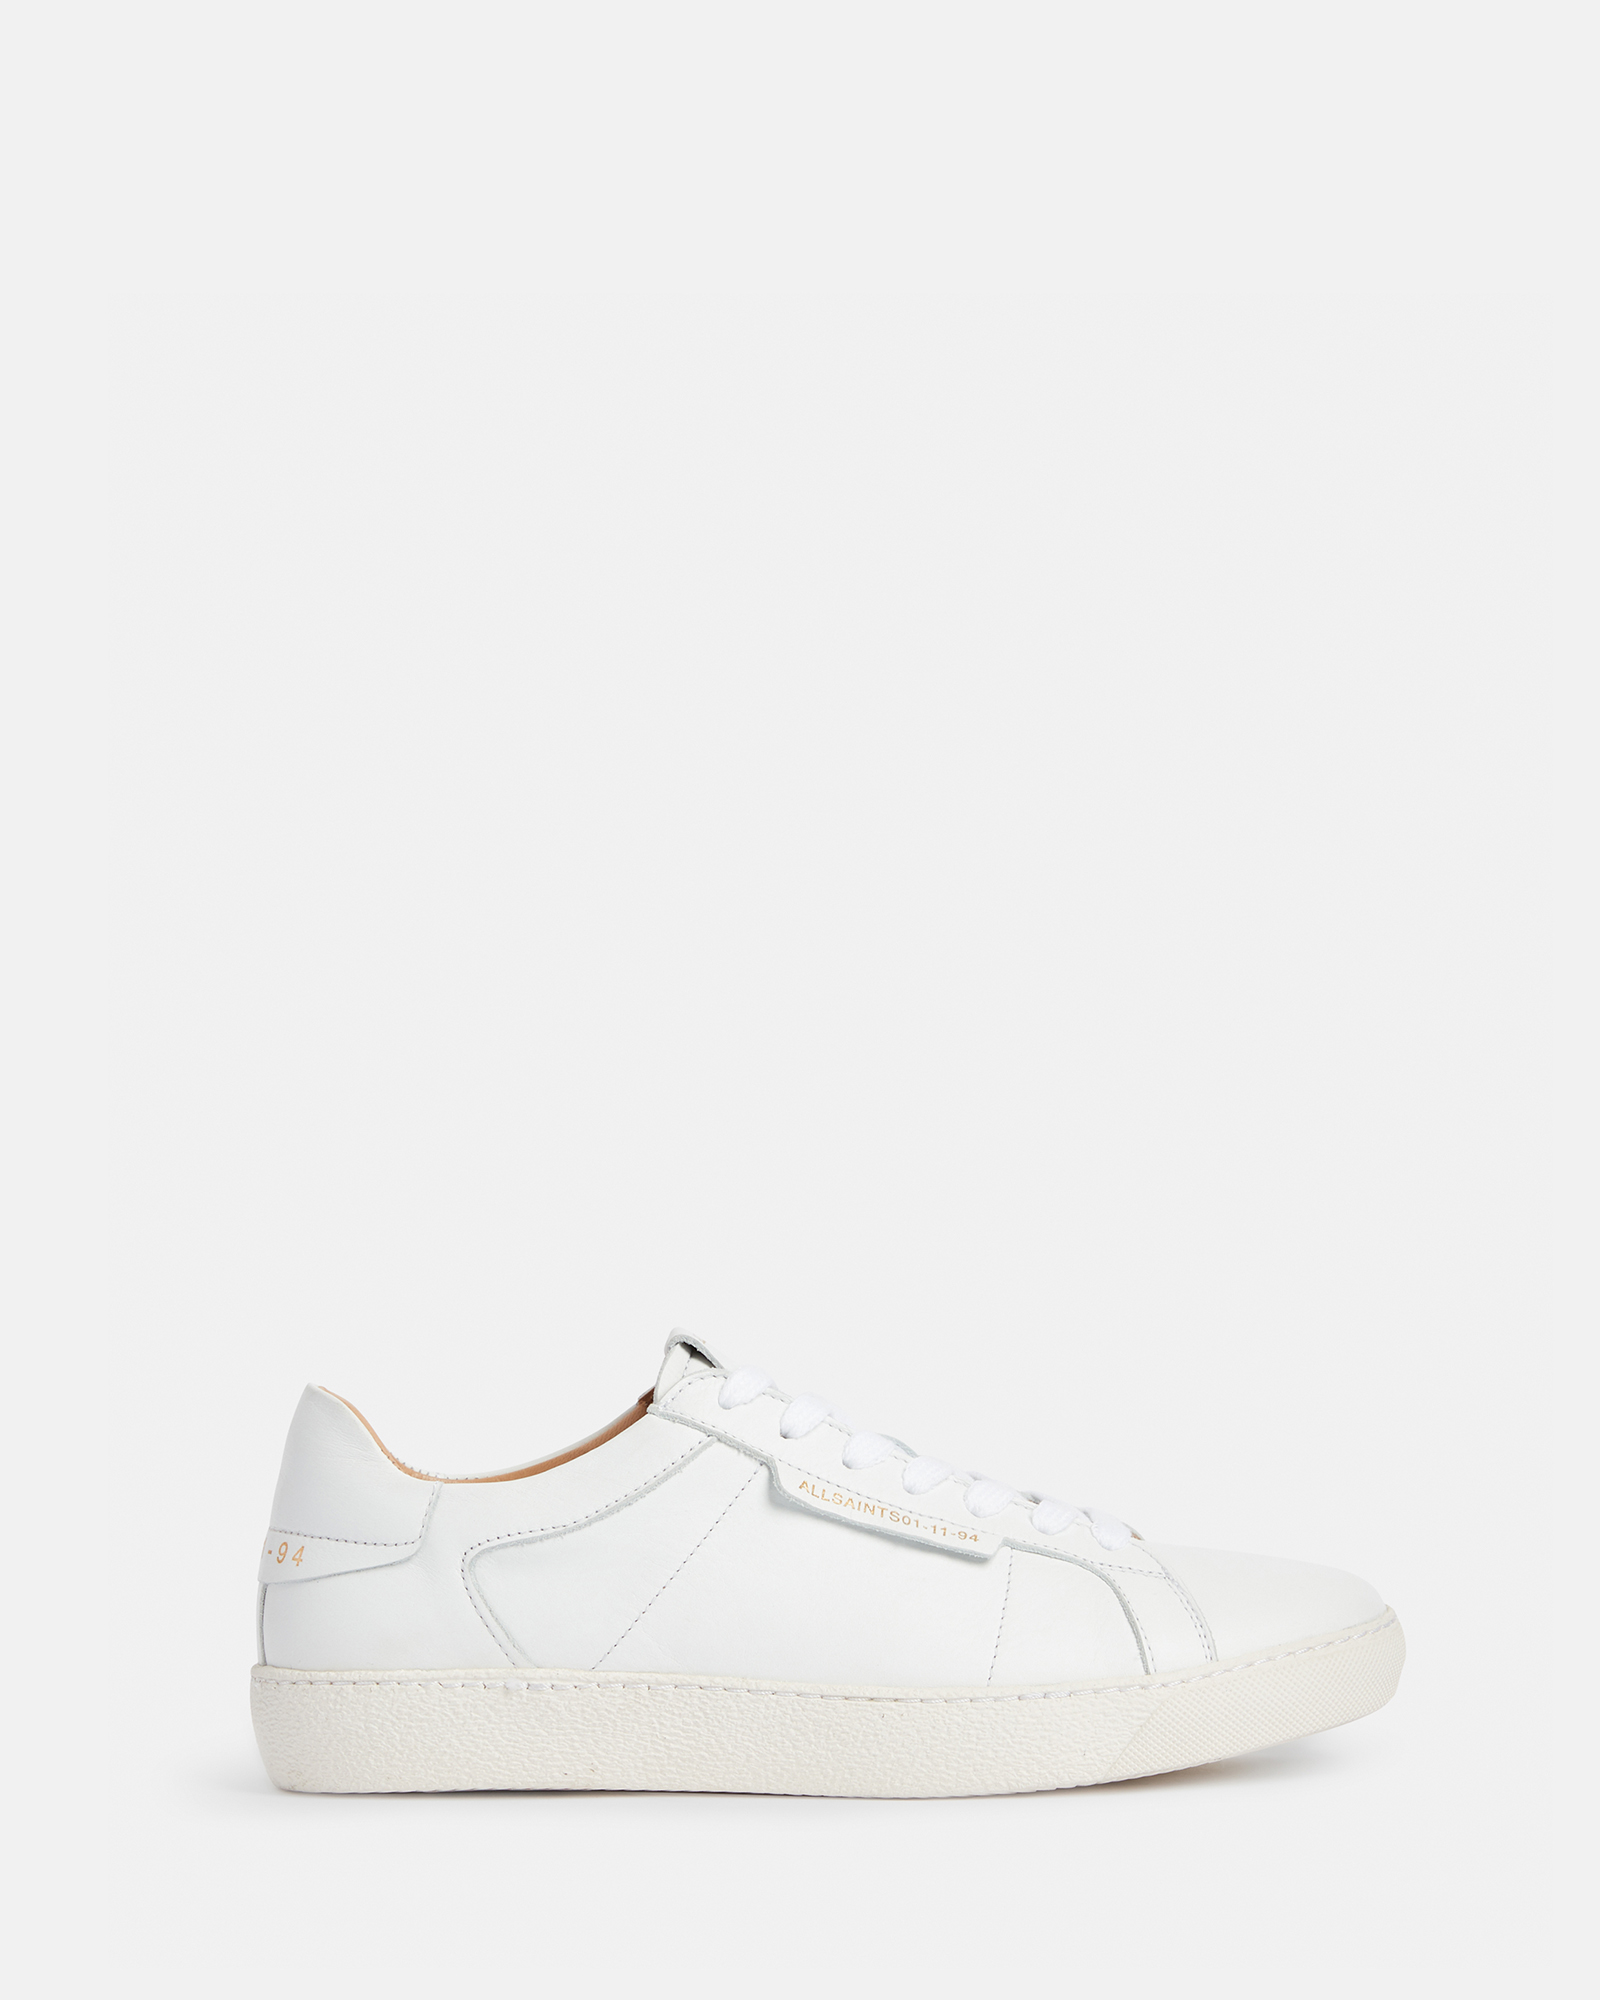 AllSaints Sheer Round Toe Leather Trainers,, White, Size: UK